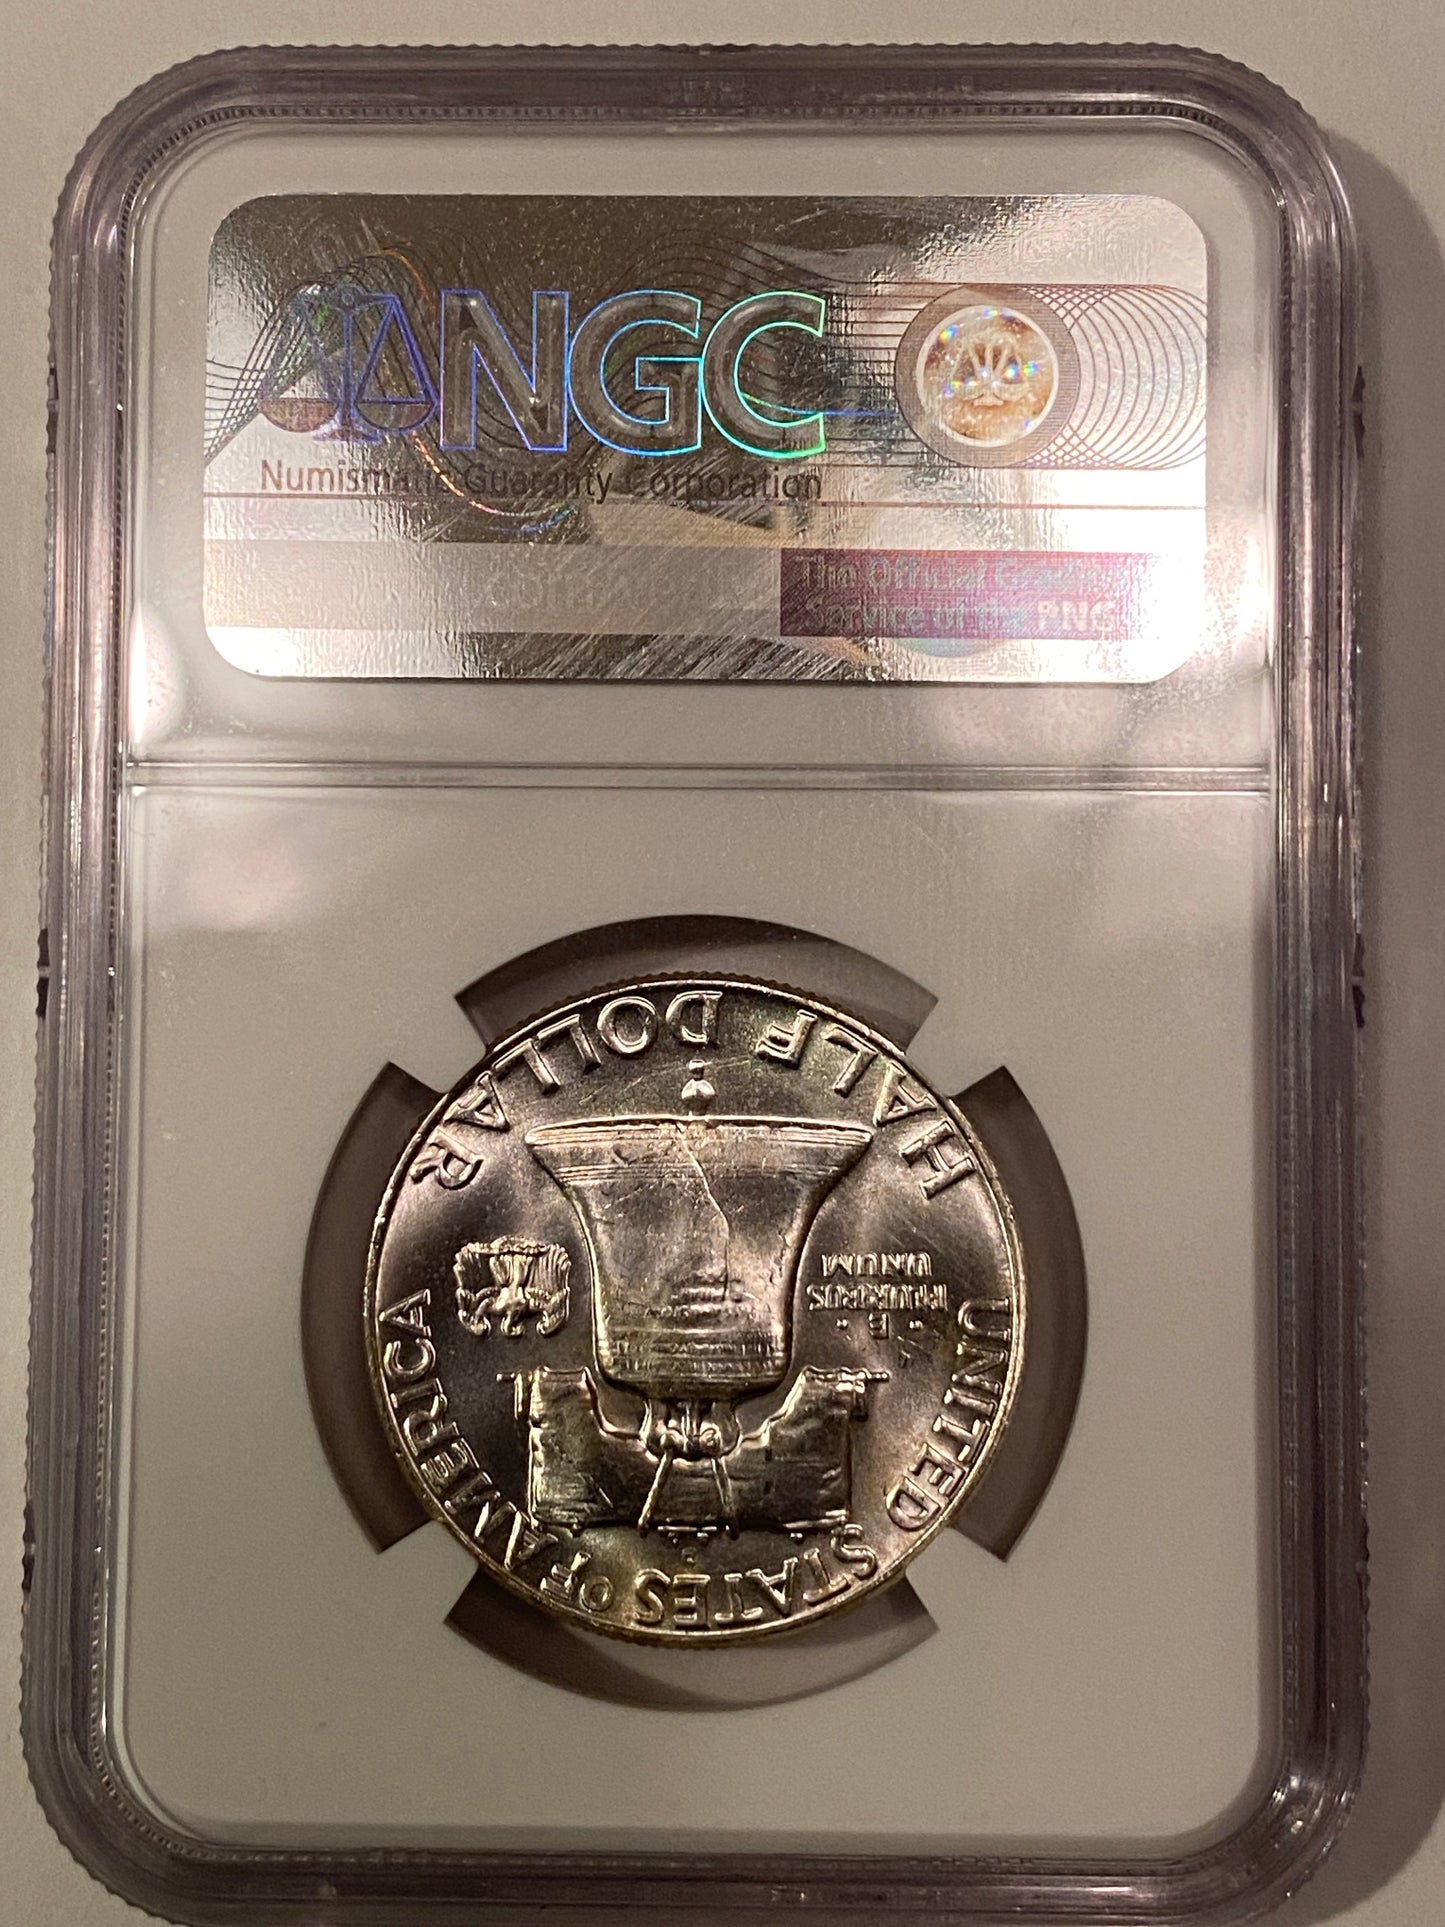 MS64 1962-D Franklin Silver Half Dollar - Certified by NGC!